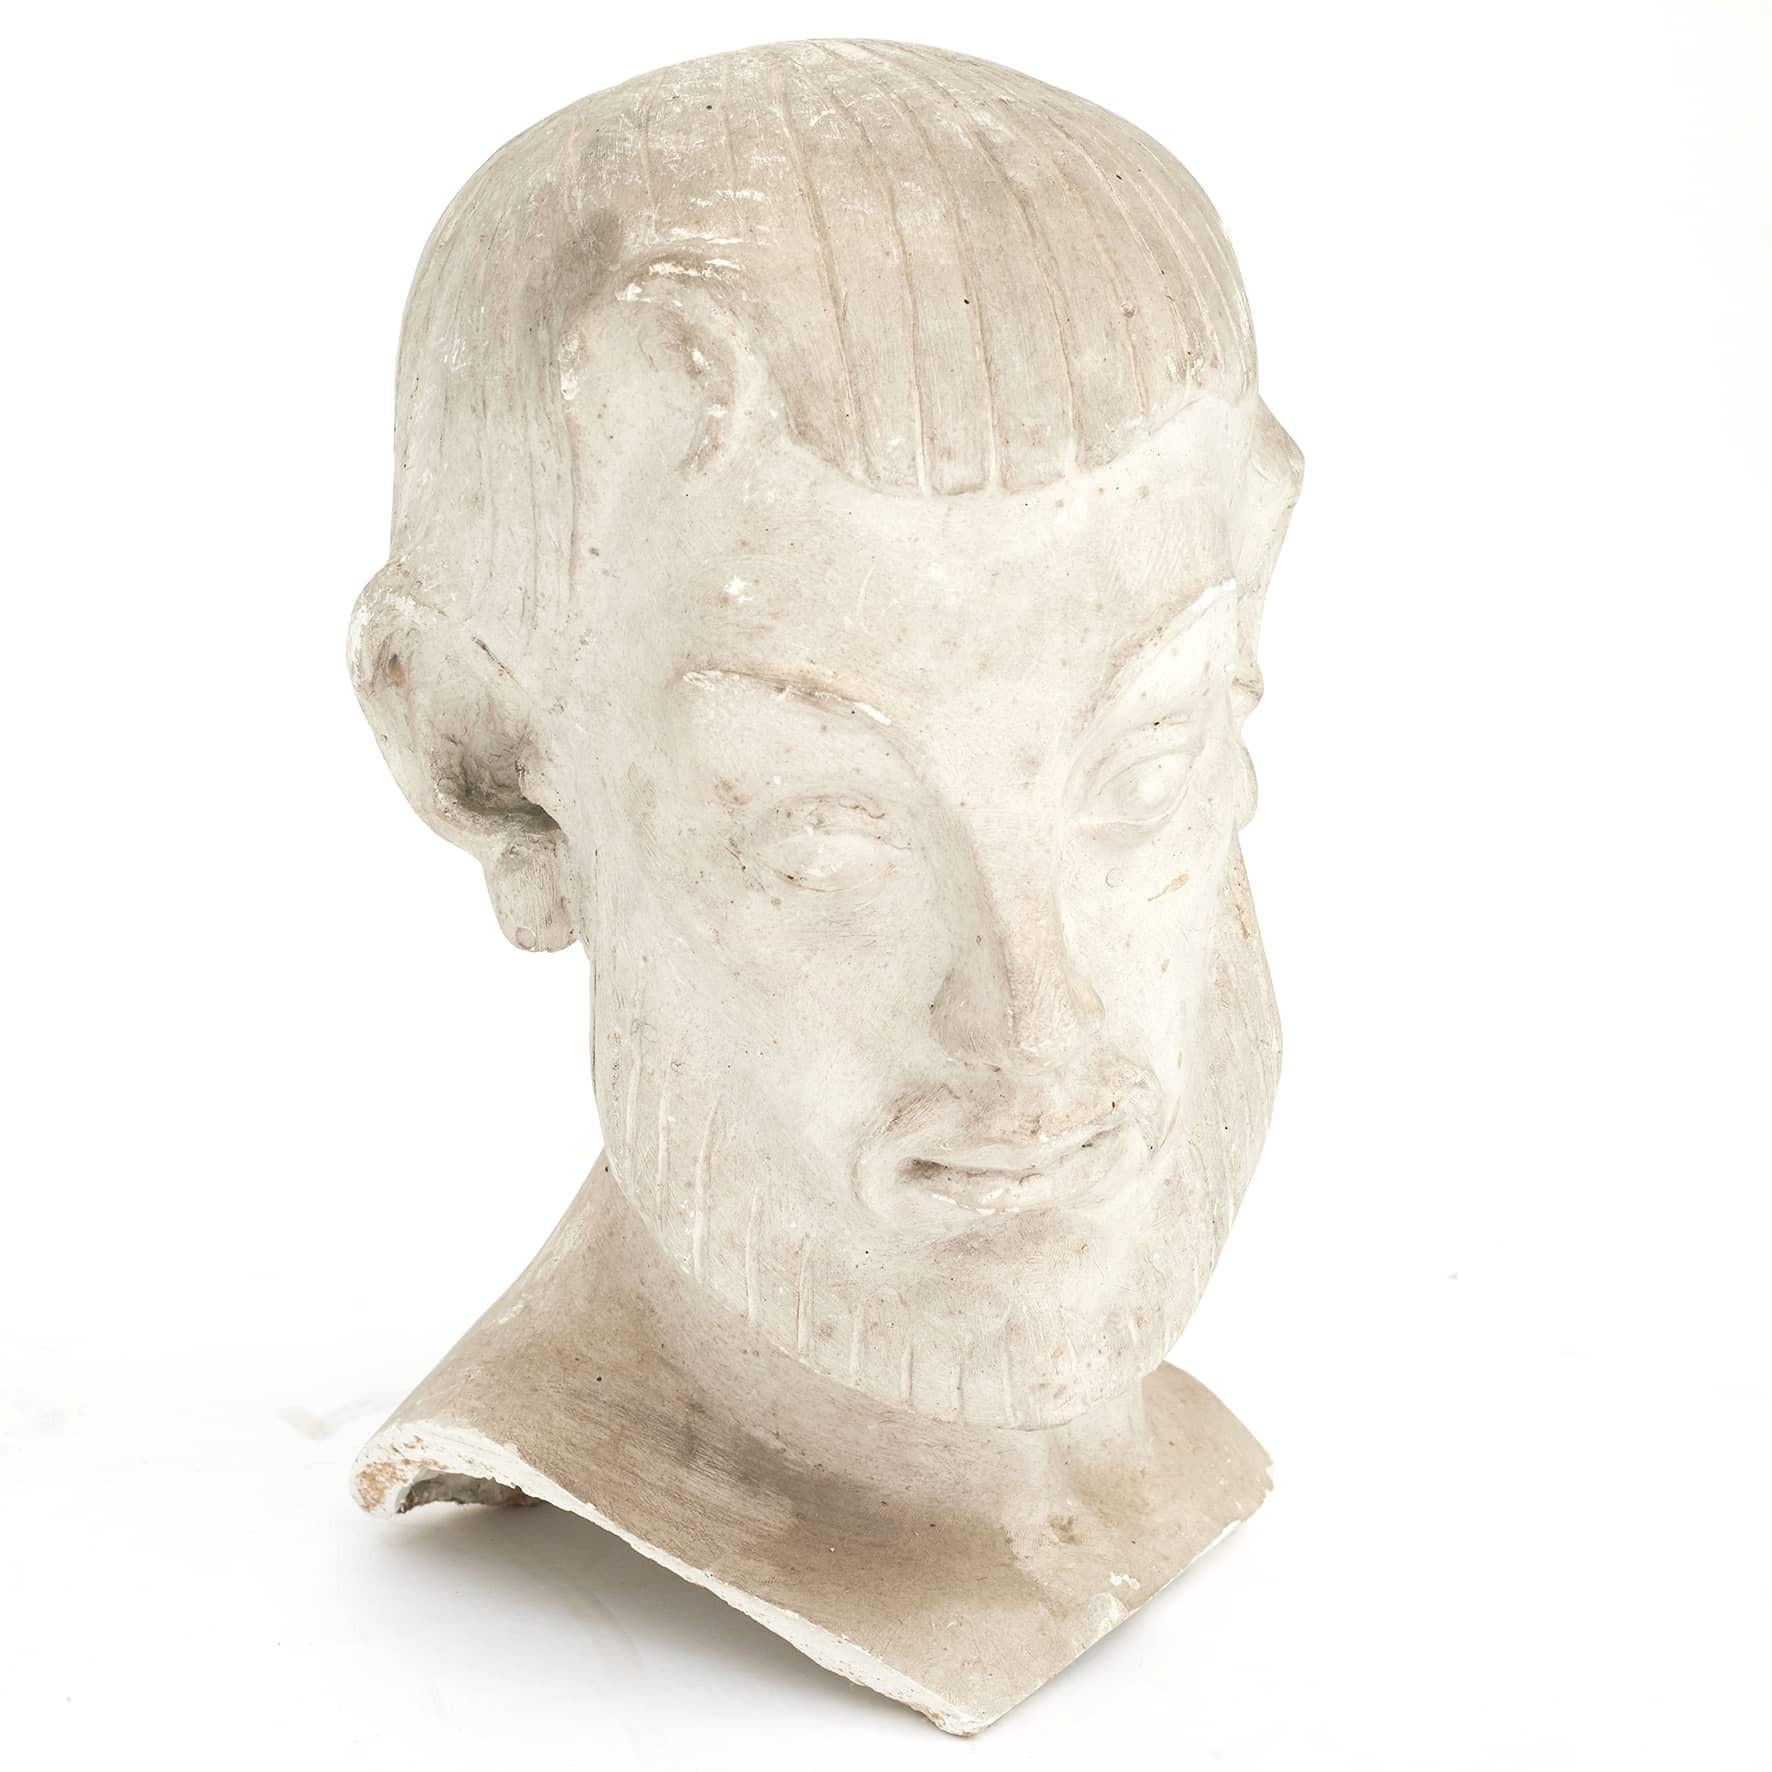 Johannes C. Bjerg 1886-1955.
Head in plaster of a preliminary study for the sculpture 